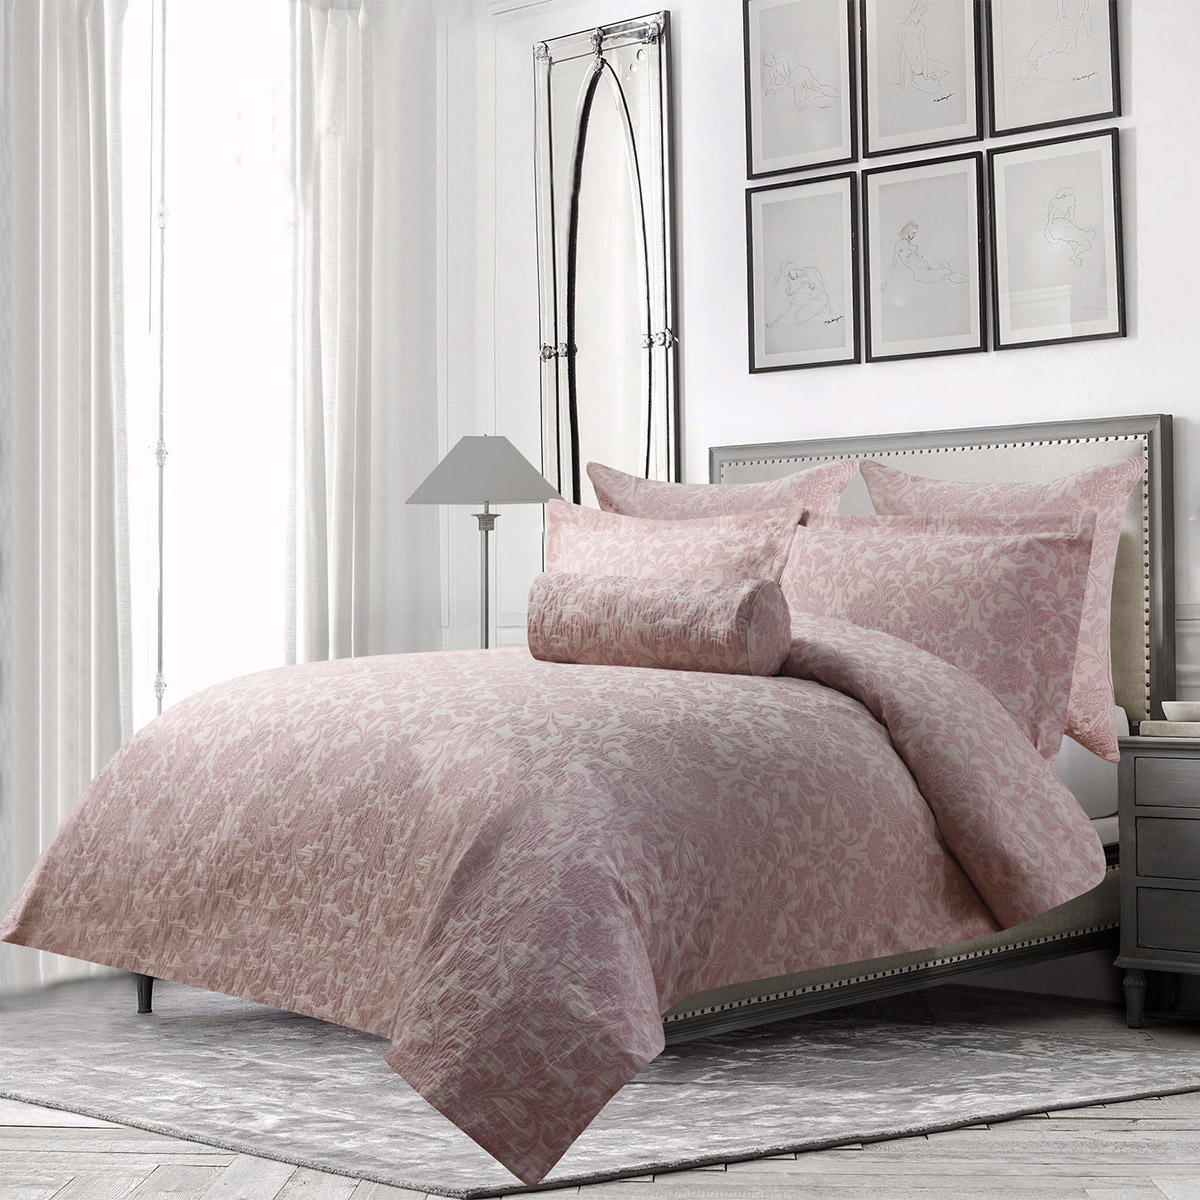 Dunnes Stores Pink Parma Duvet Cover